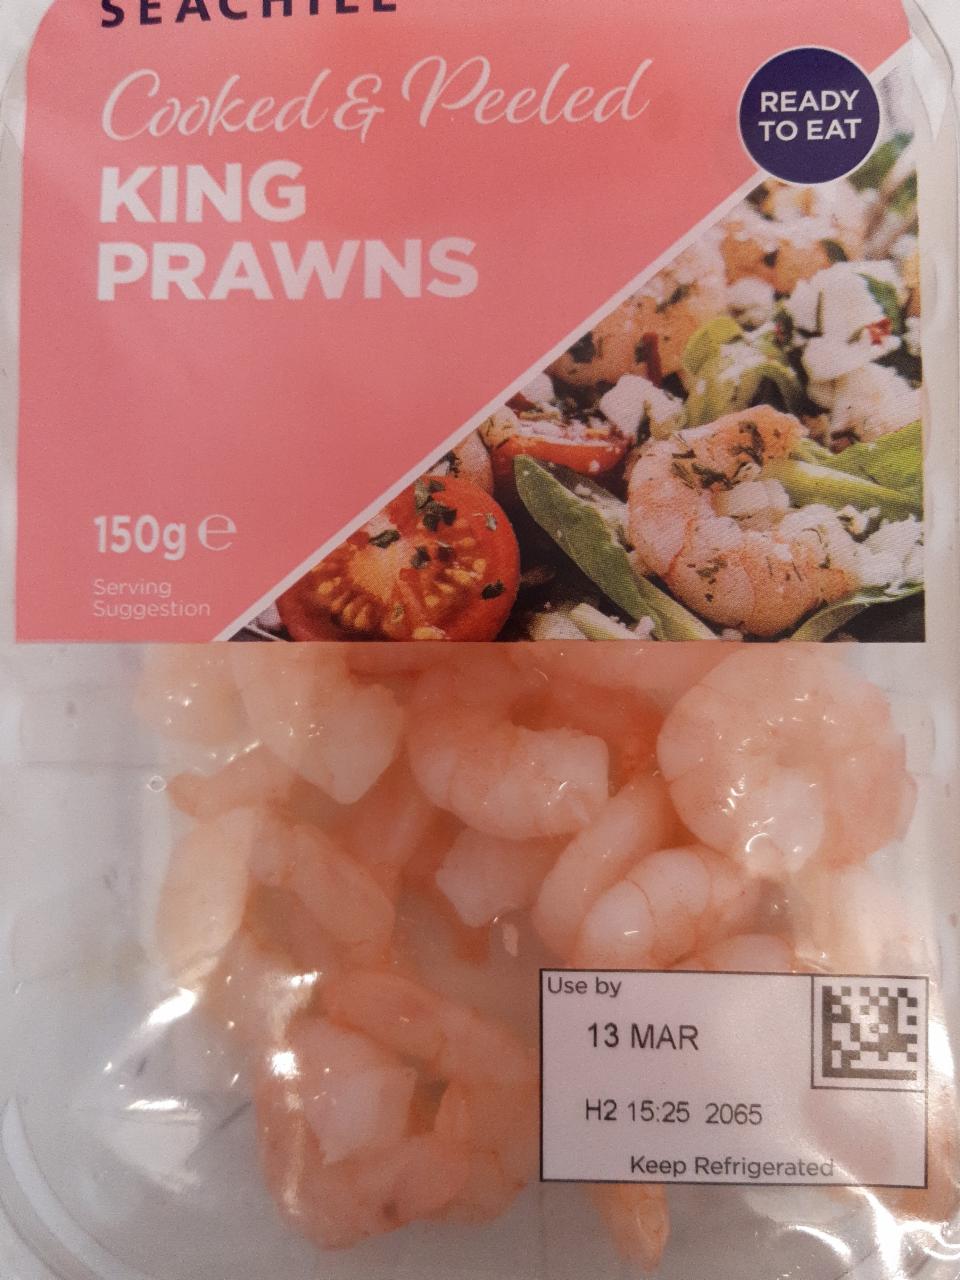 Fotografie - King Prawns Cooked & Peeled Seachill